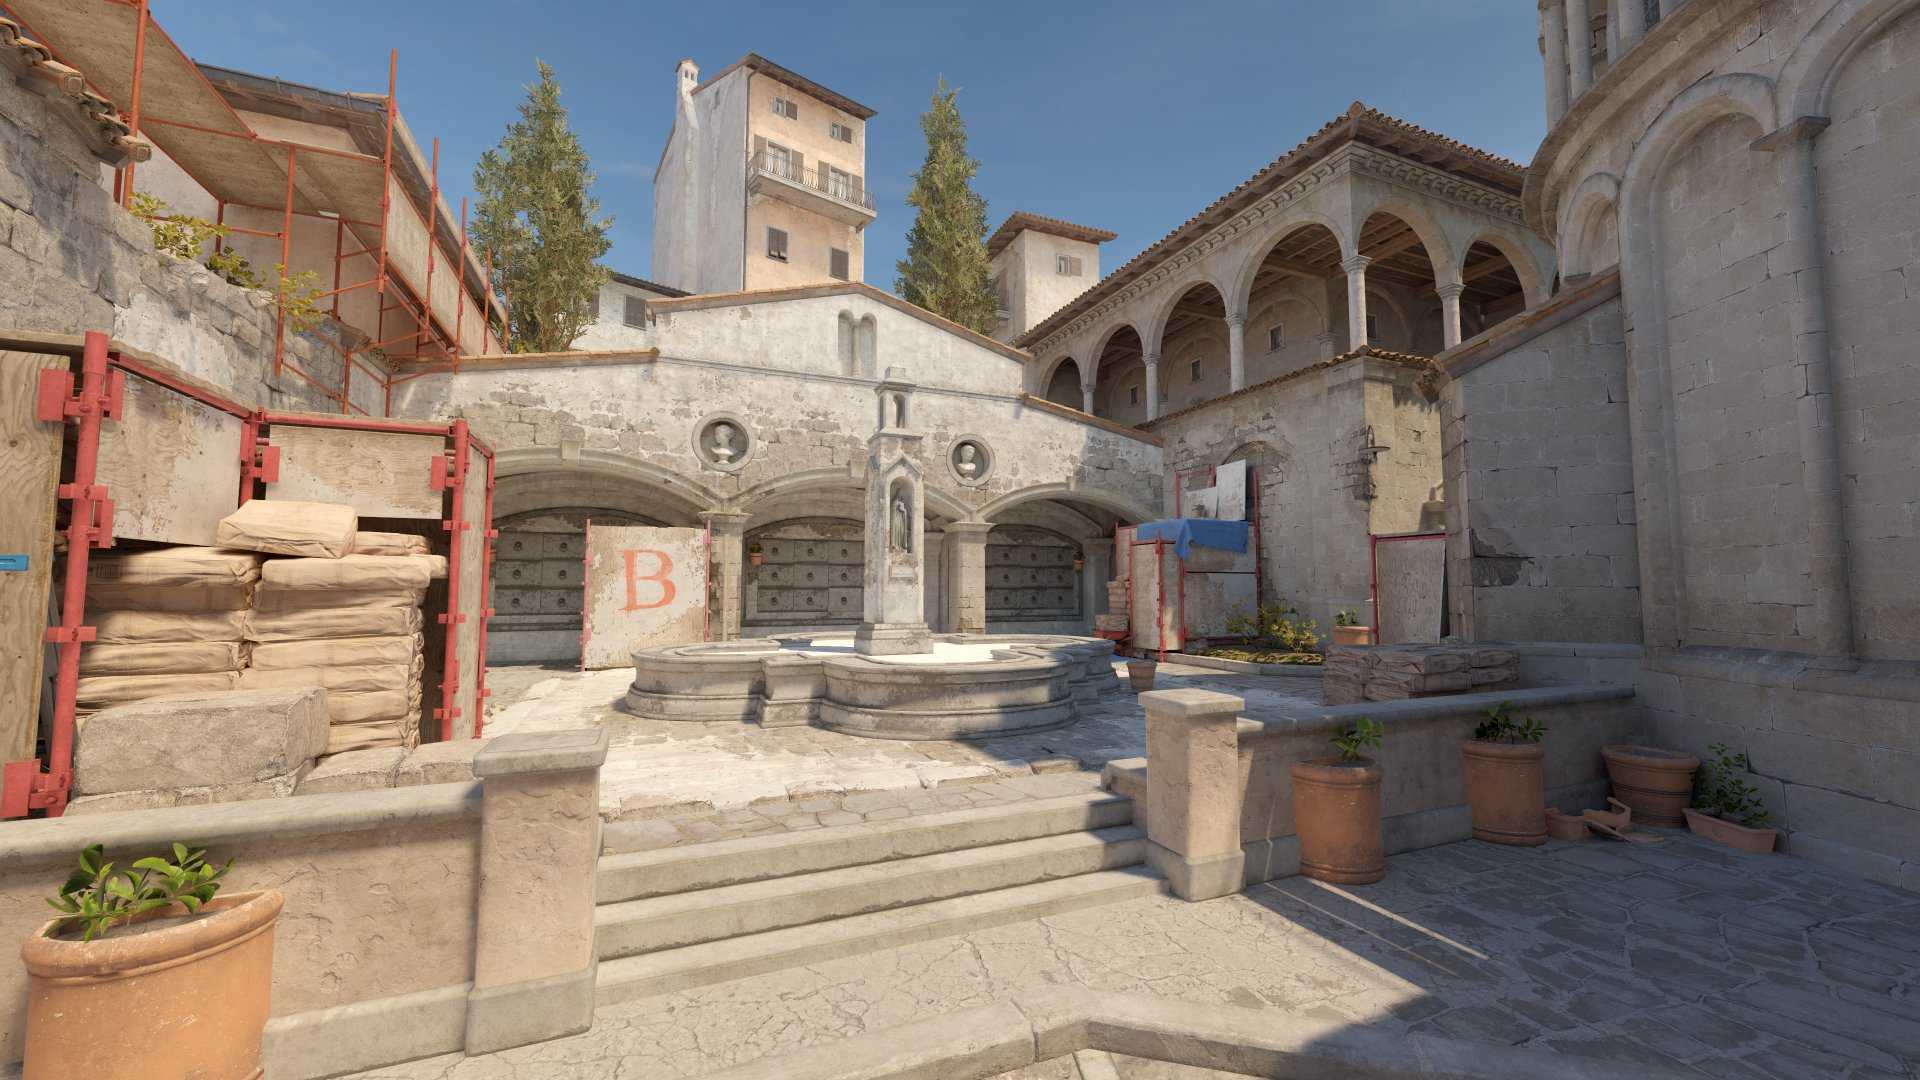 inferno b site in cs2